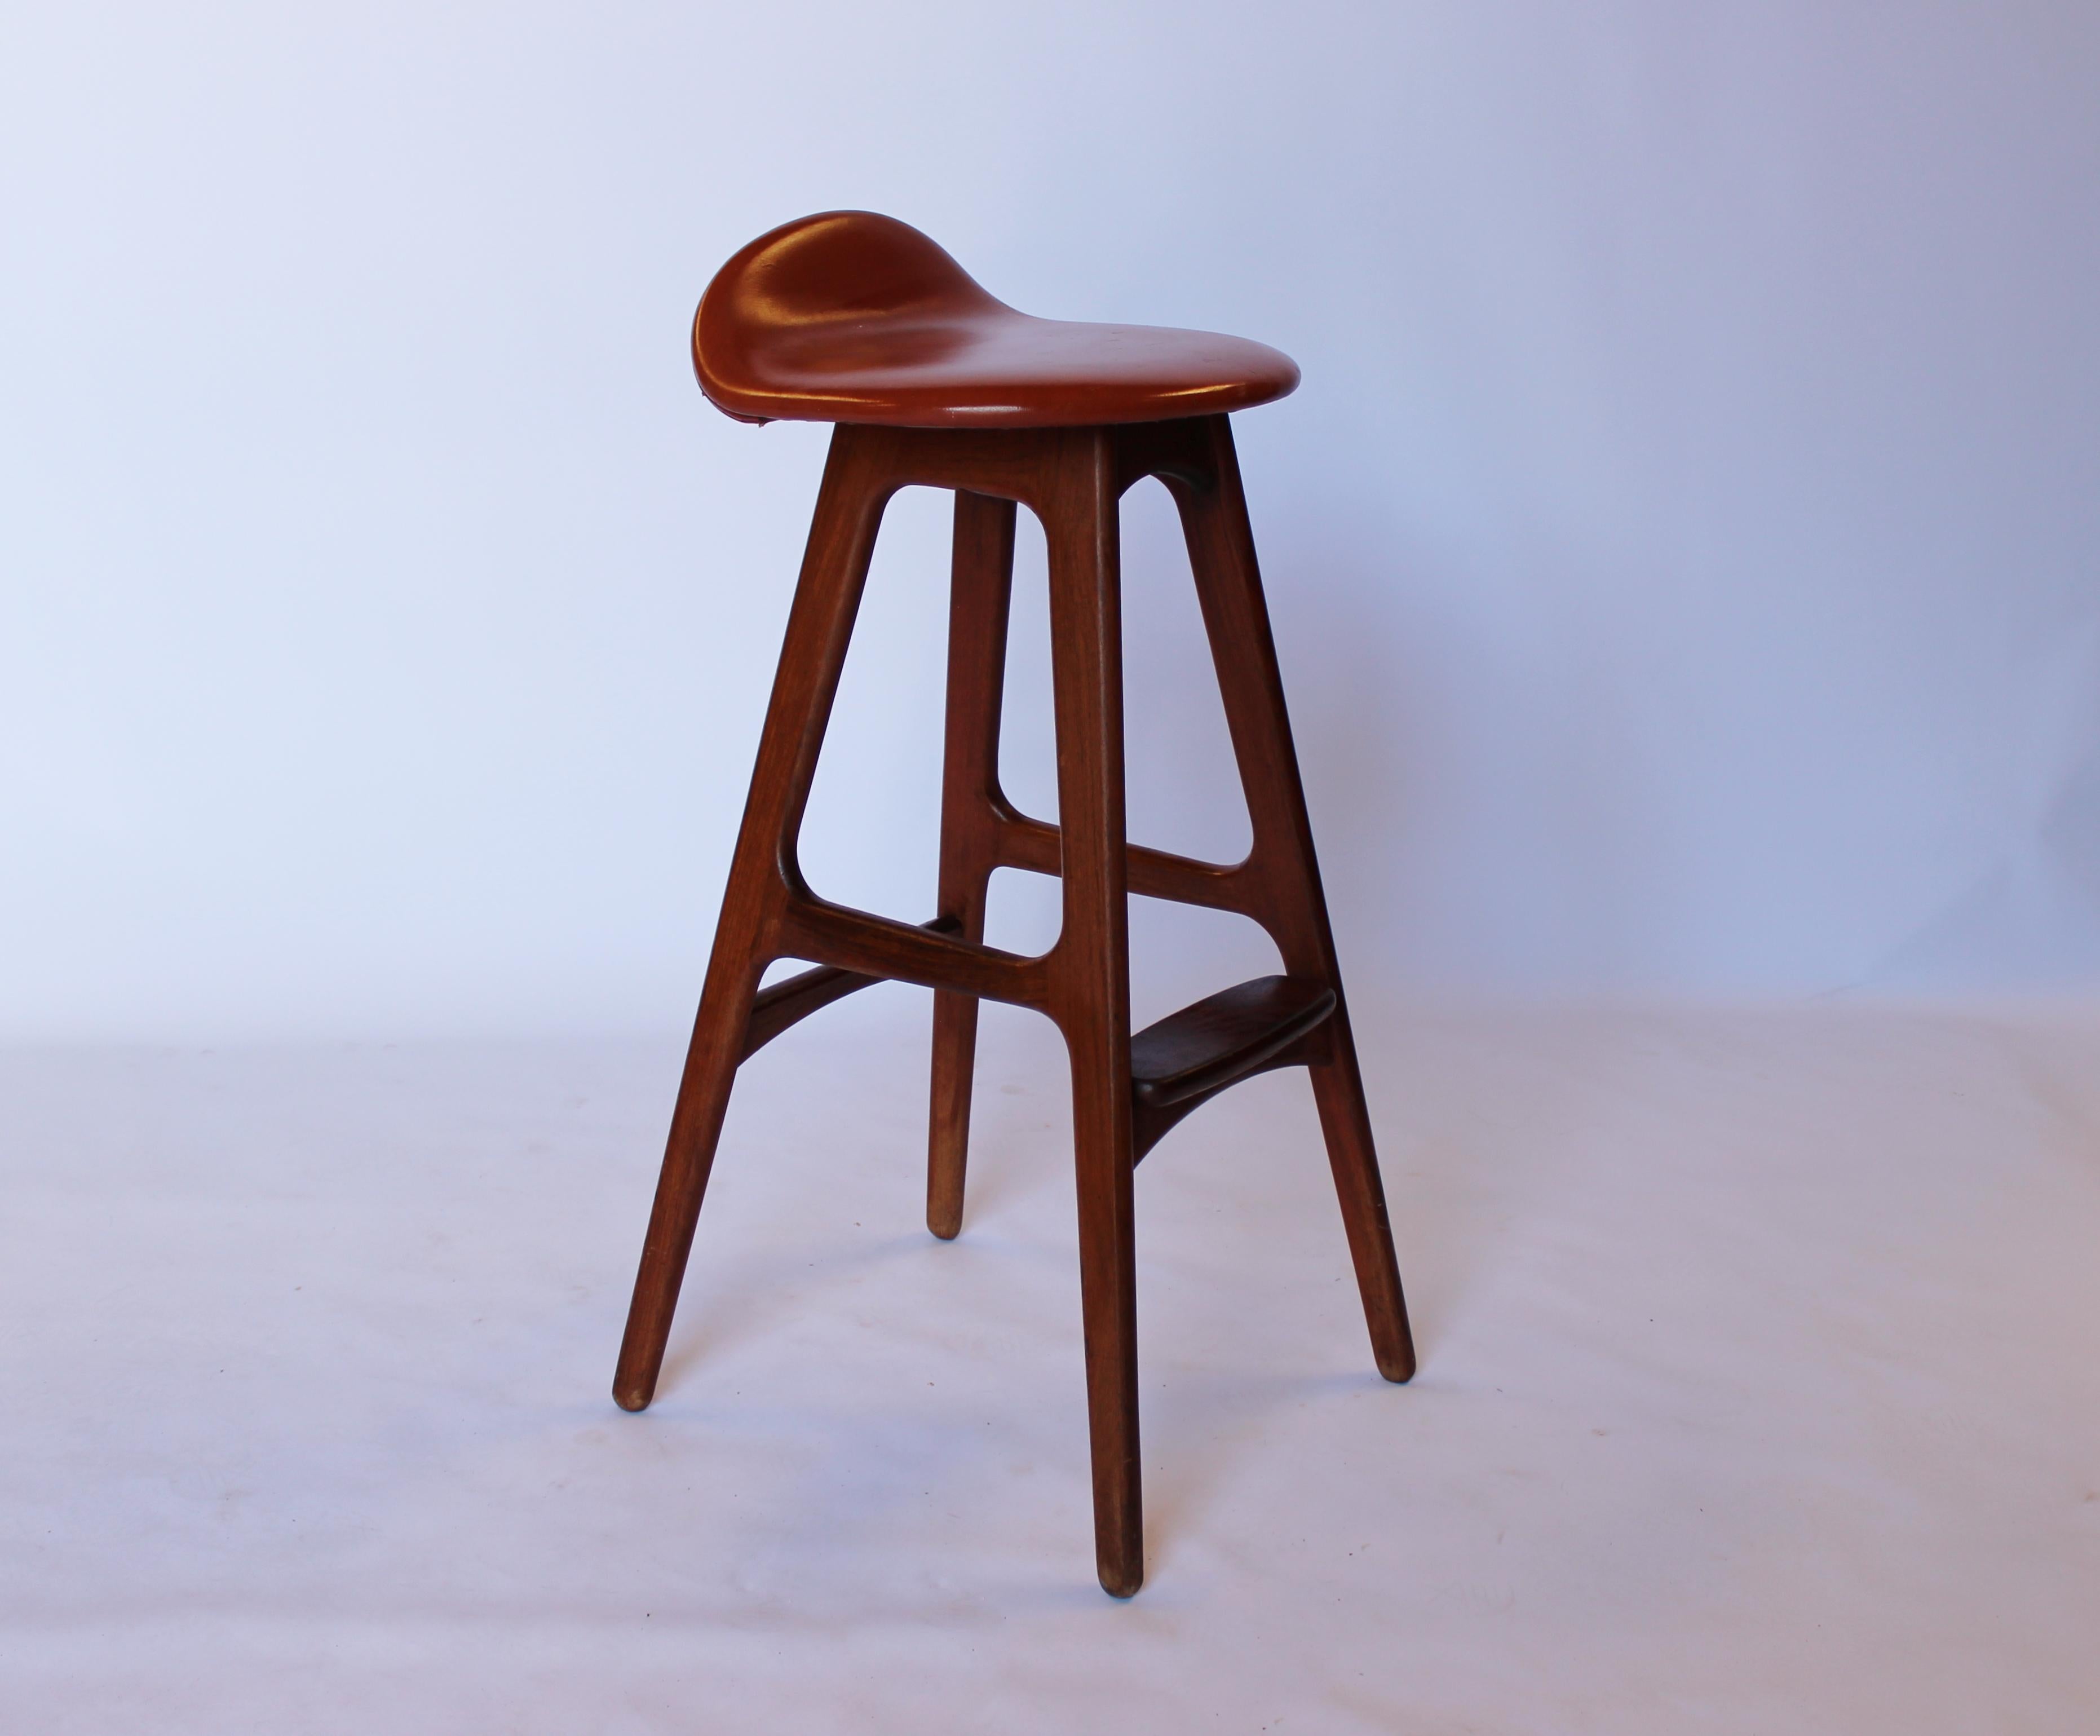 Bar stool, model OD61, designed by Erik Buch and manufactured by Odense furniture factory. The stools are of rosewood and elegance leather seats. The stool is in great vintage condition.